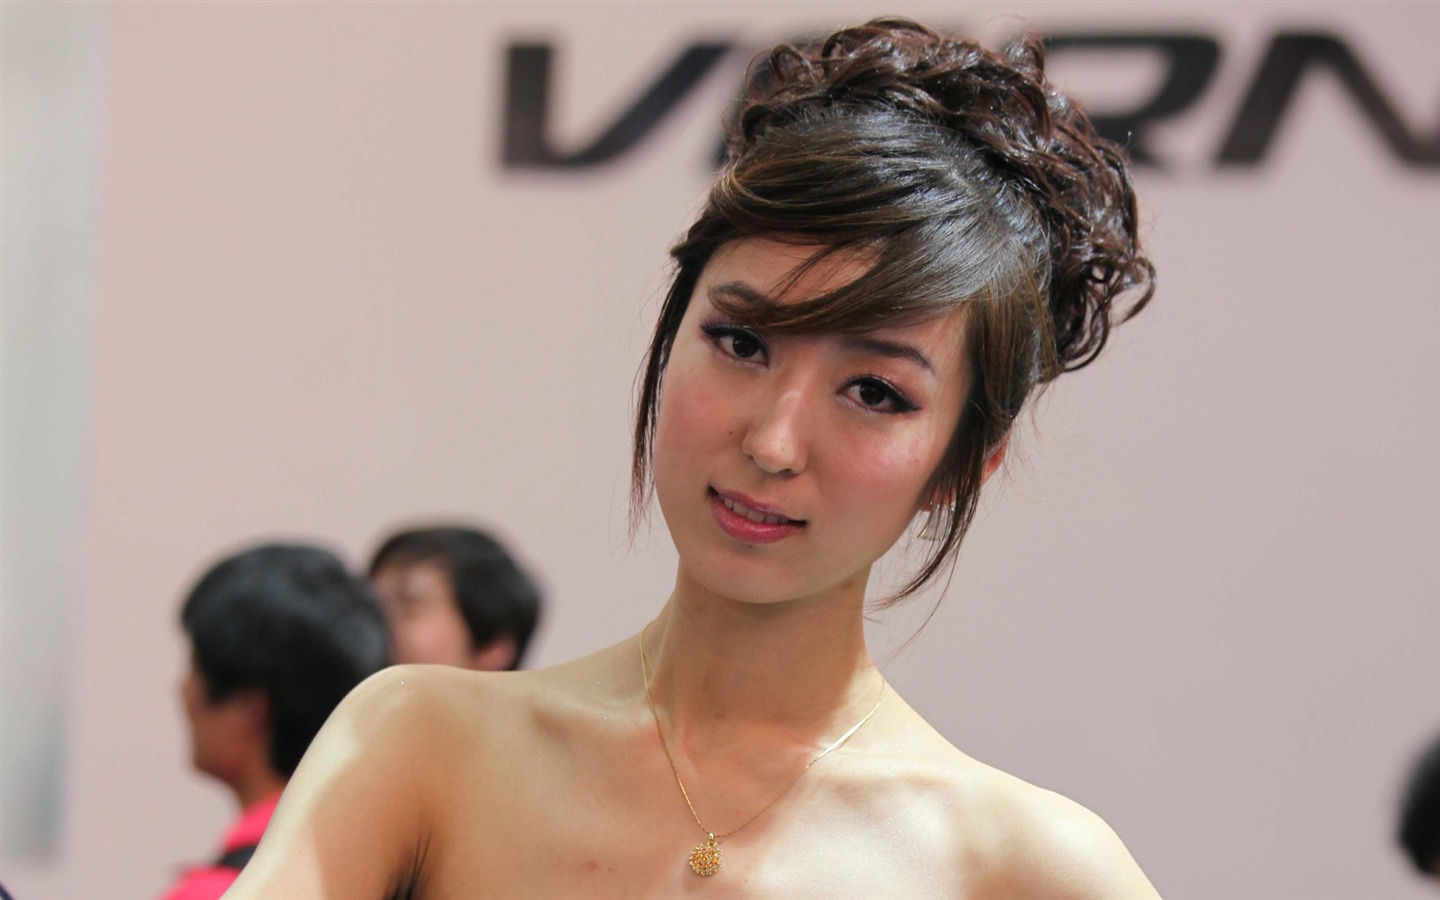 2010 Beijing International Auto Show beauty (2) (the wind chasing the clouds works) #20 - 1440x900